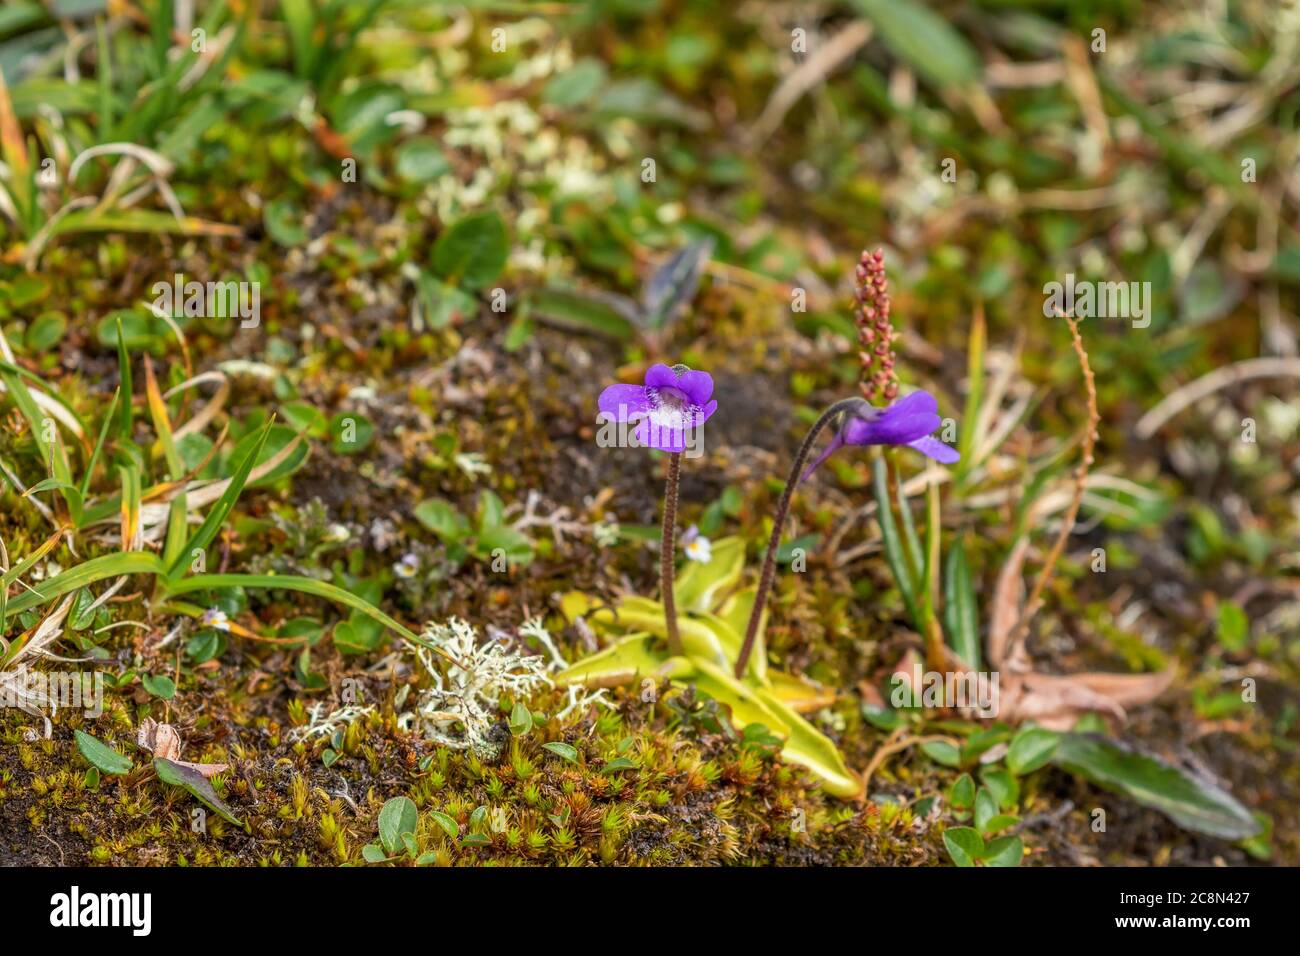 Butterwort flowers that blooming in the summer Stock Photo